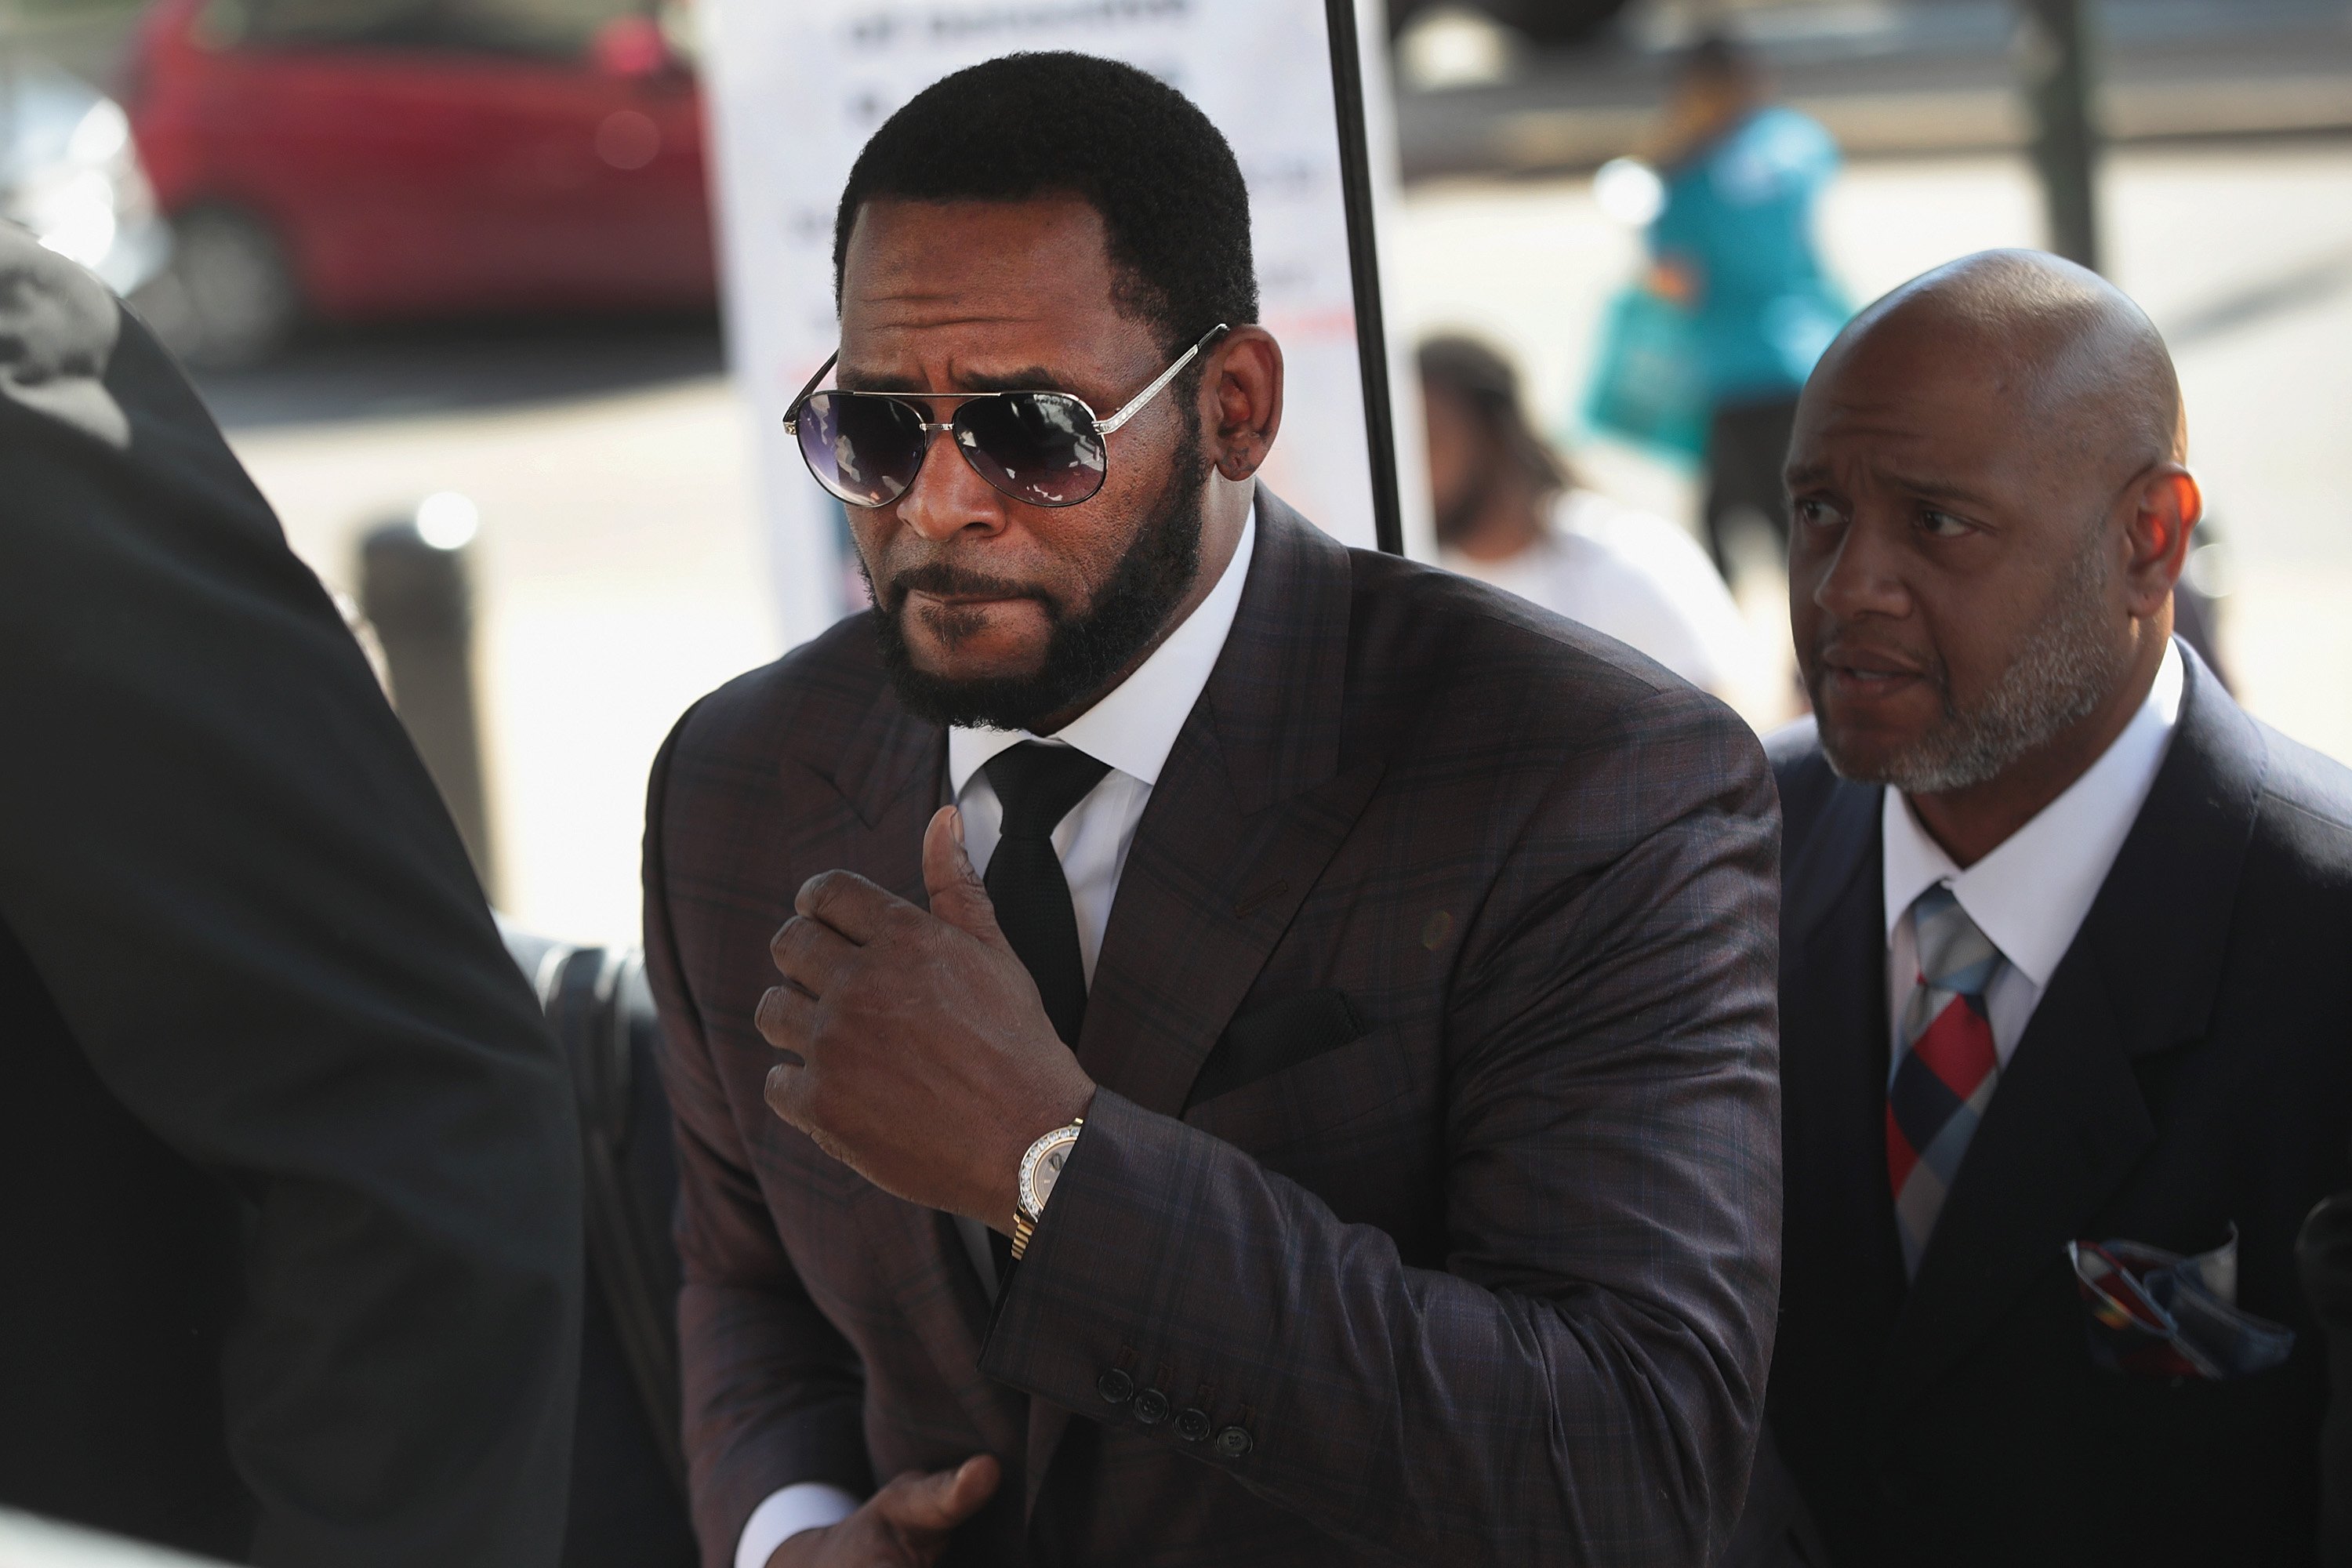 R. Kelly arriving at the Leighton Criminal Courts Building for a hearing in Chicago, Illinois while facing several counts of aggravated sexual abuse. | Photo:  Scott Olson/Getty Images